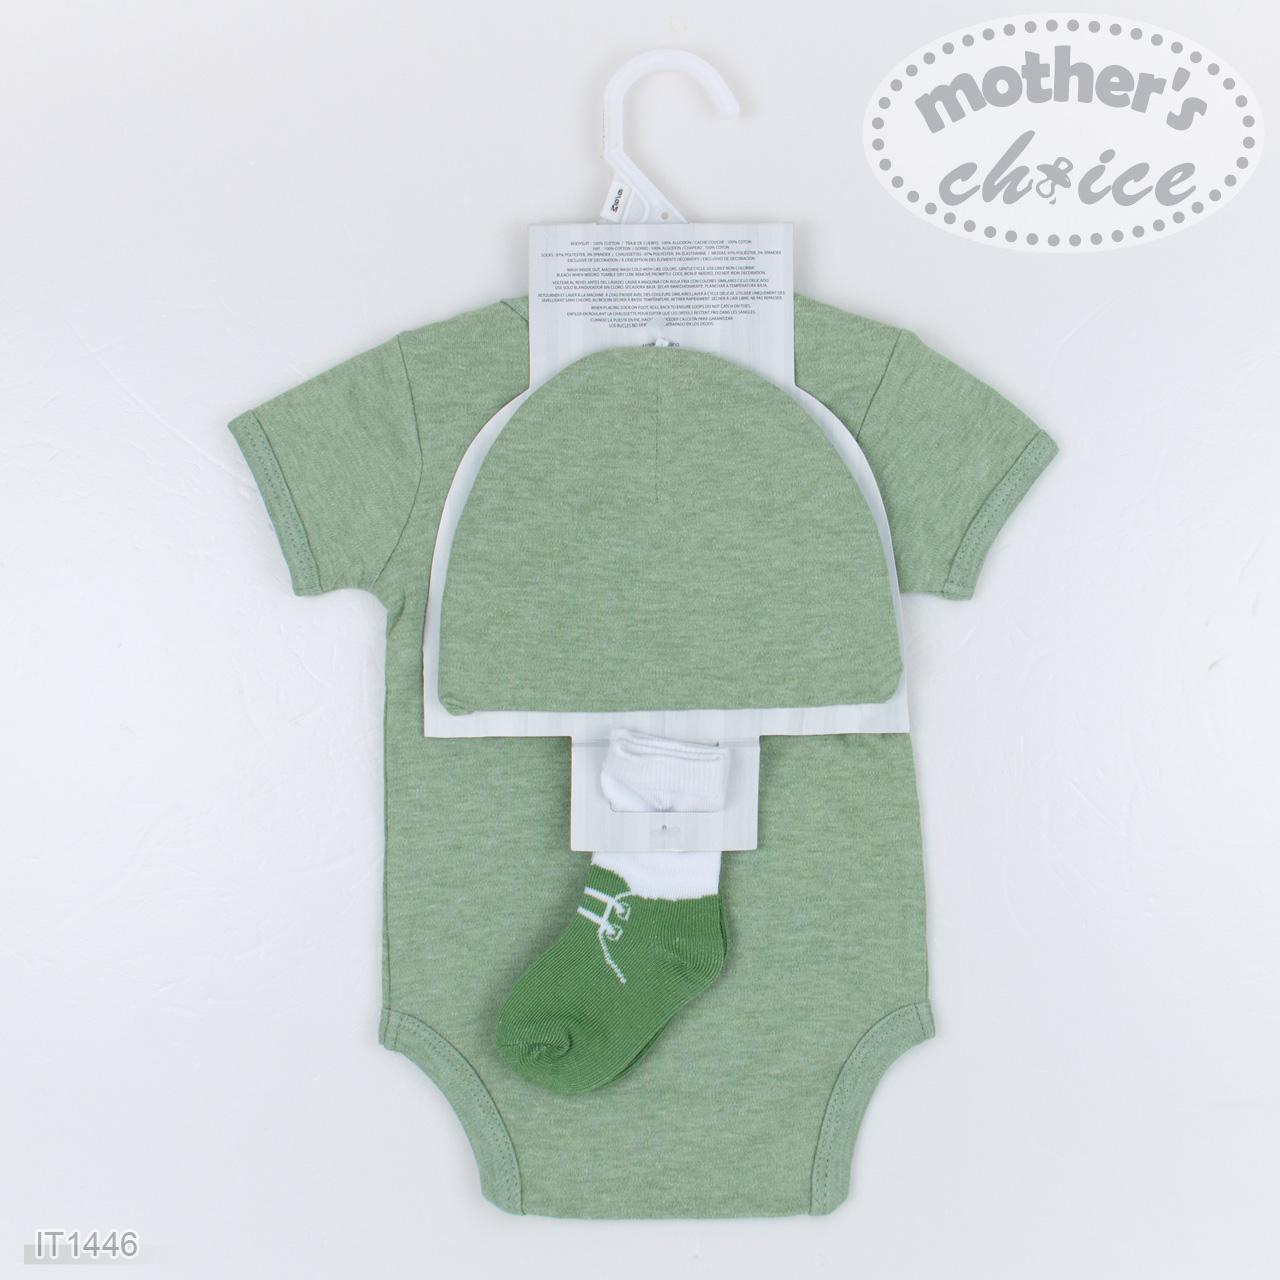 Mother's Choice 3-Piece Pack of 100% Pure Cotton Green Bodysuit, Hat and Socks